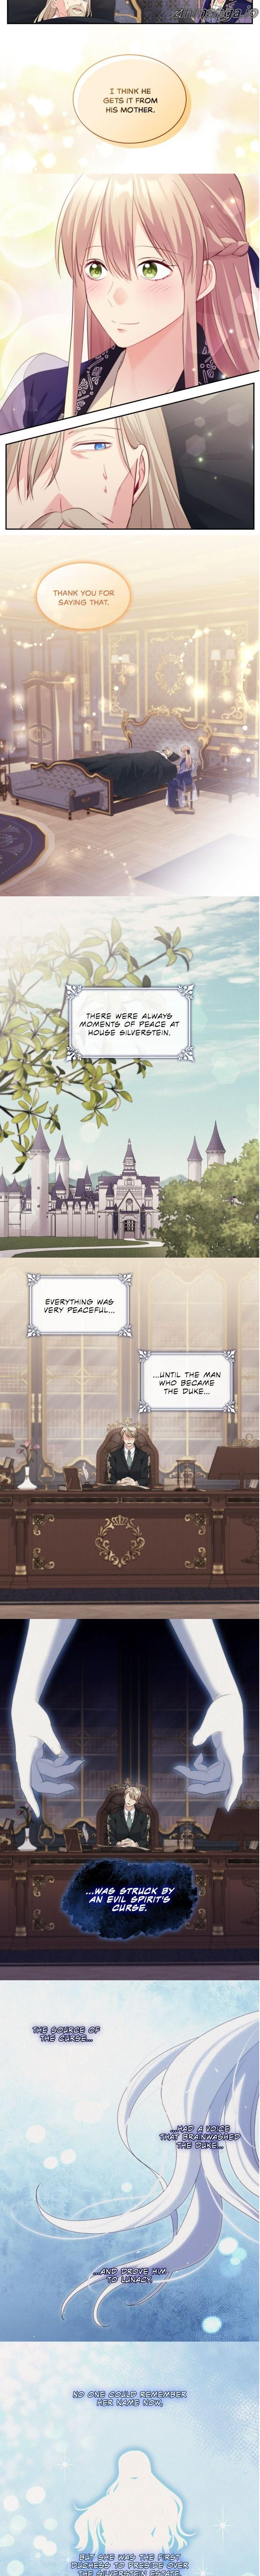 Daisy: How To Become The Duke's Fiancée Chapter 165 page 5